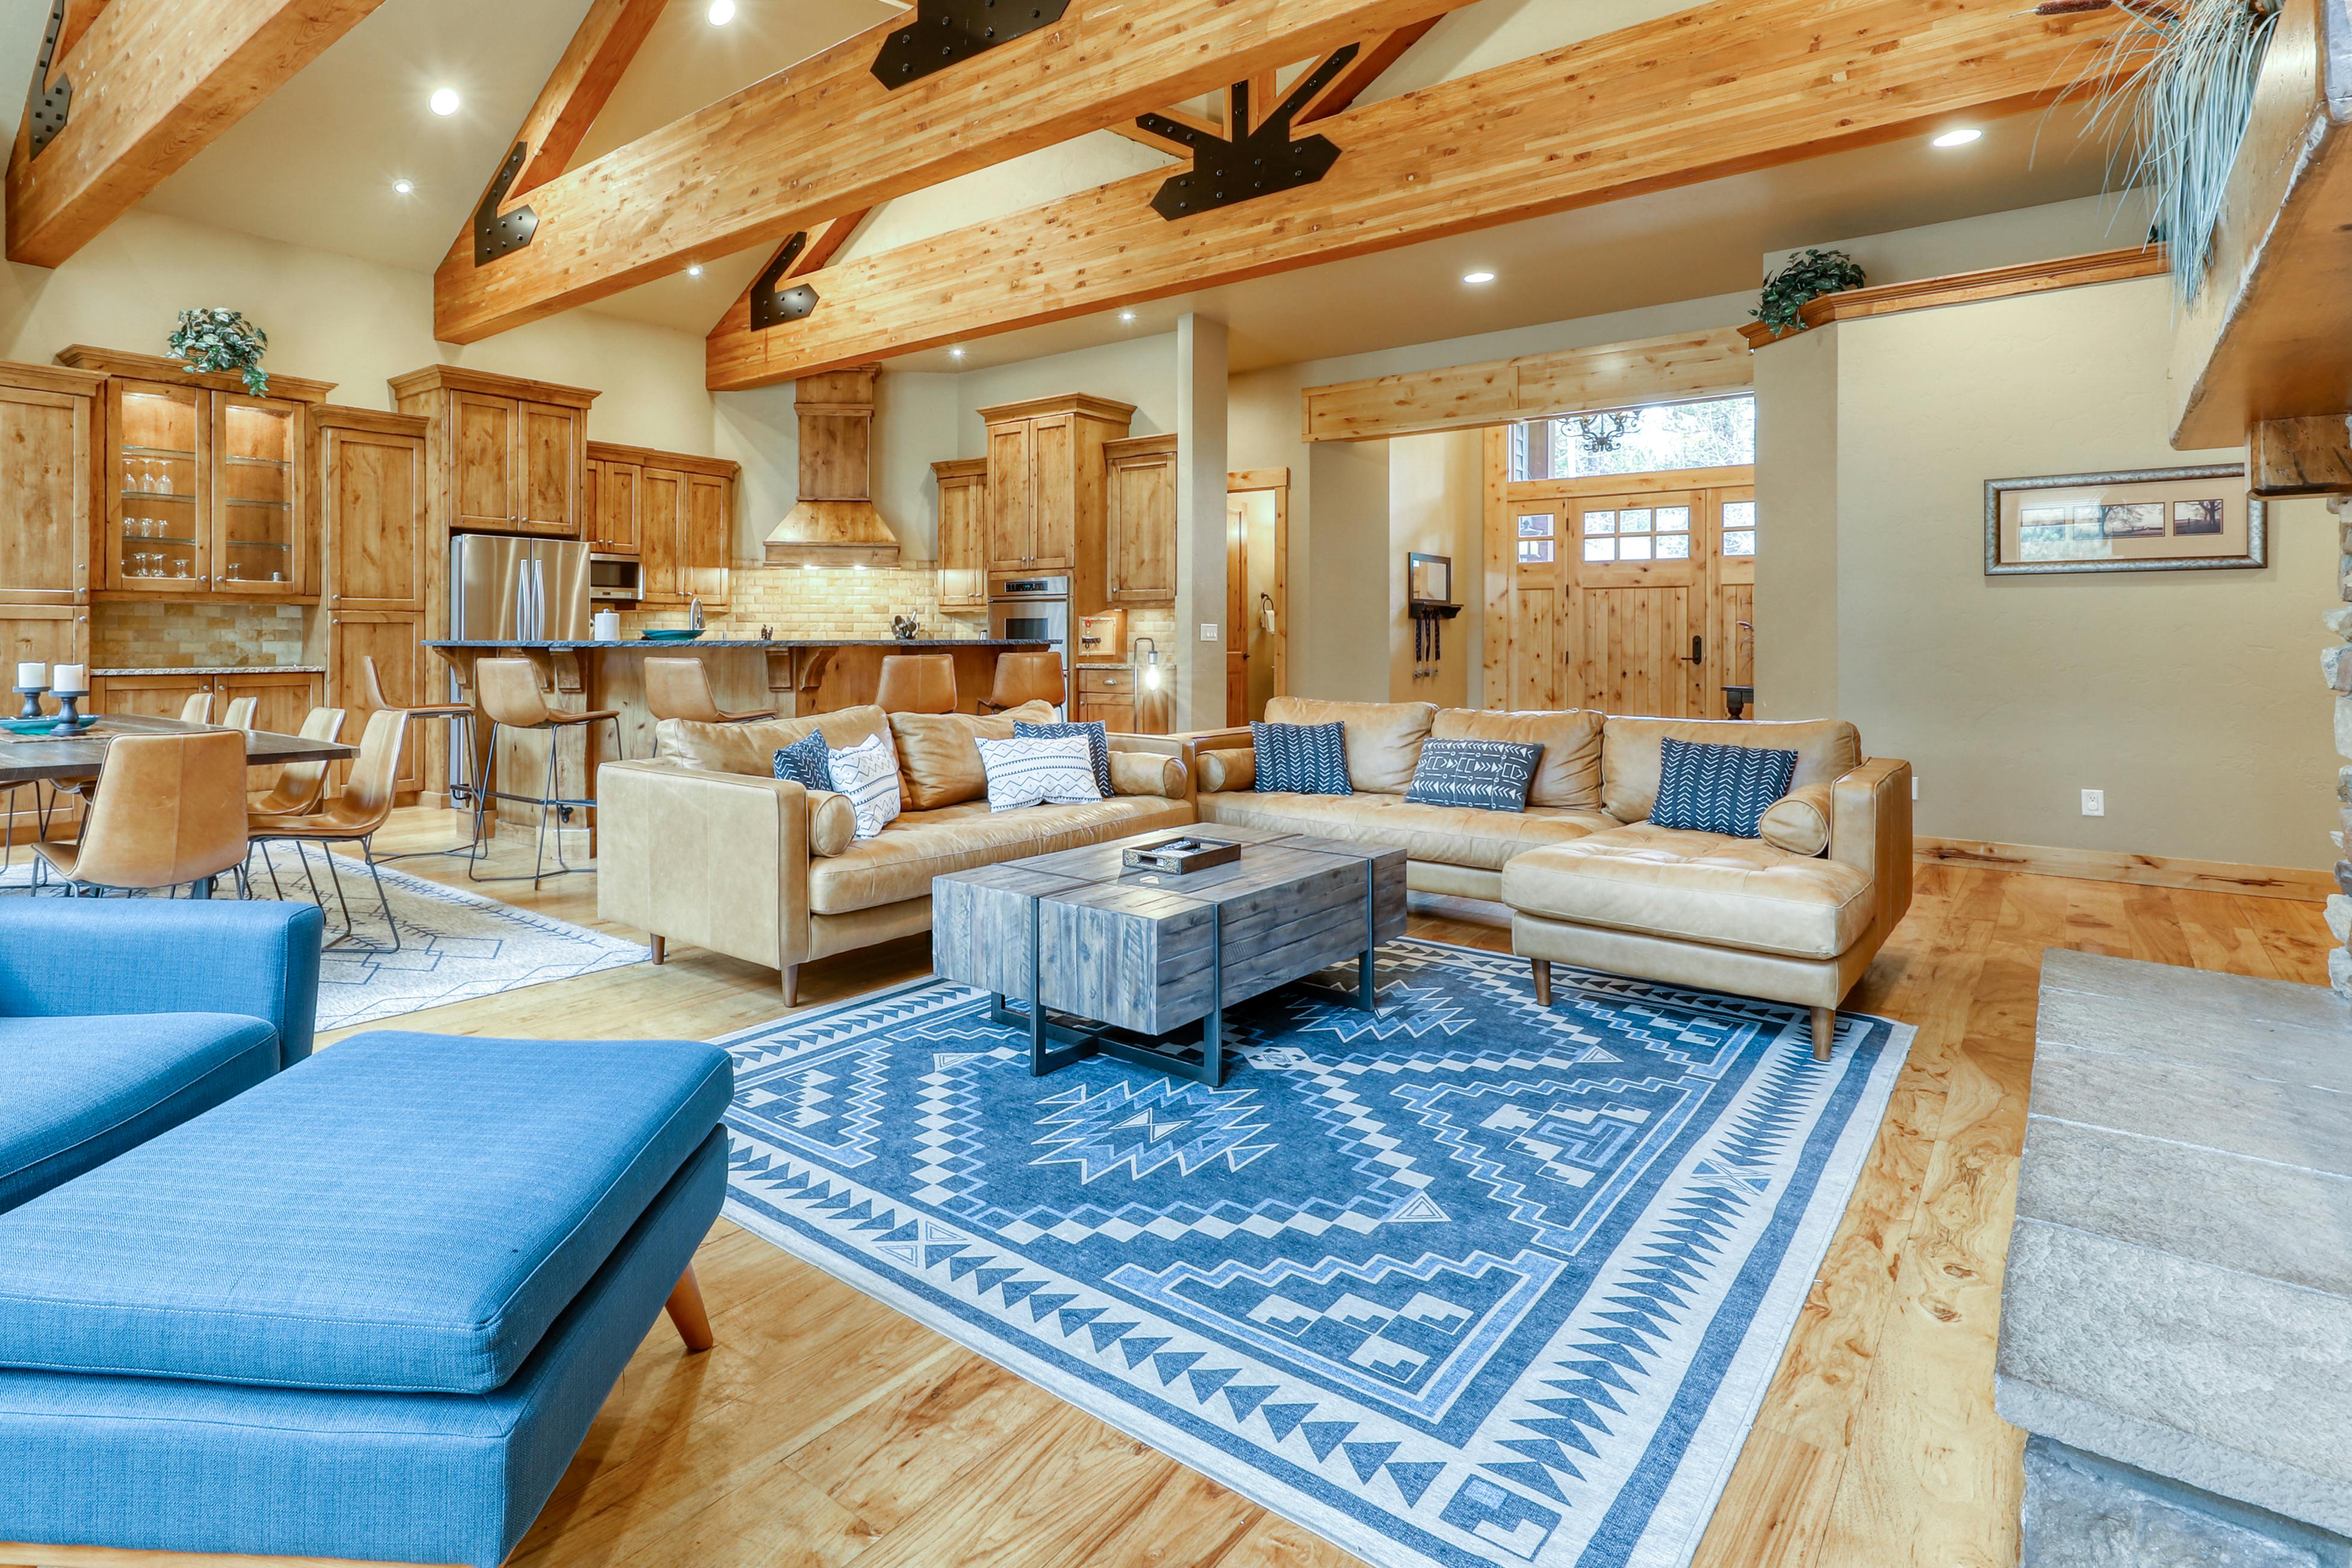 10 cabin decor ideas you can bring into your home even if you don